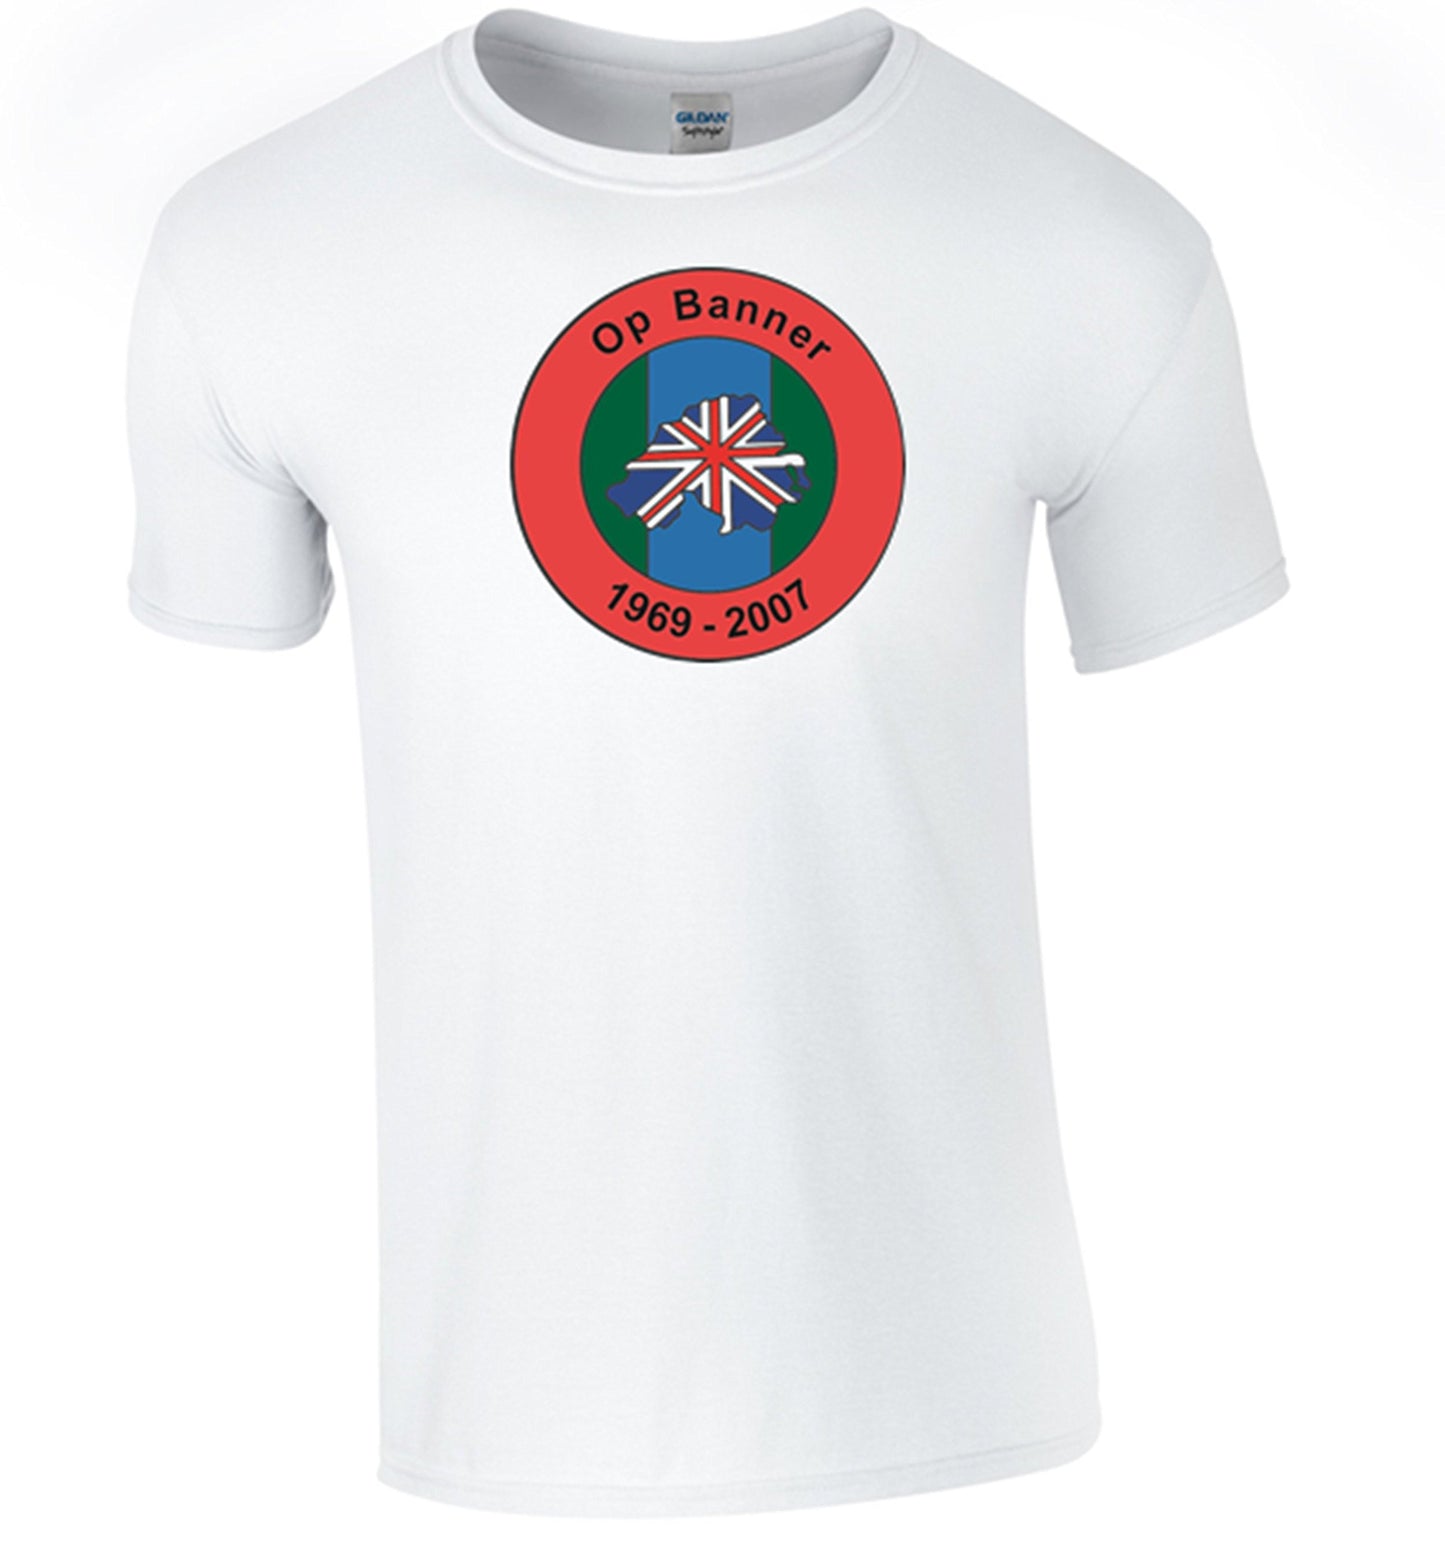 Northern Ireland Ops Banner T-Shirt (S, White) - Army 1157 kit Army 1157 Kit